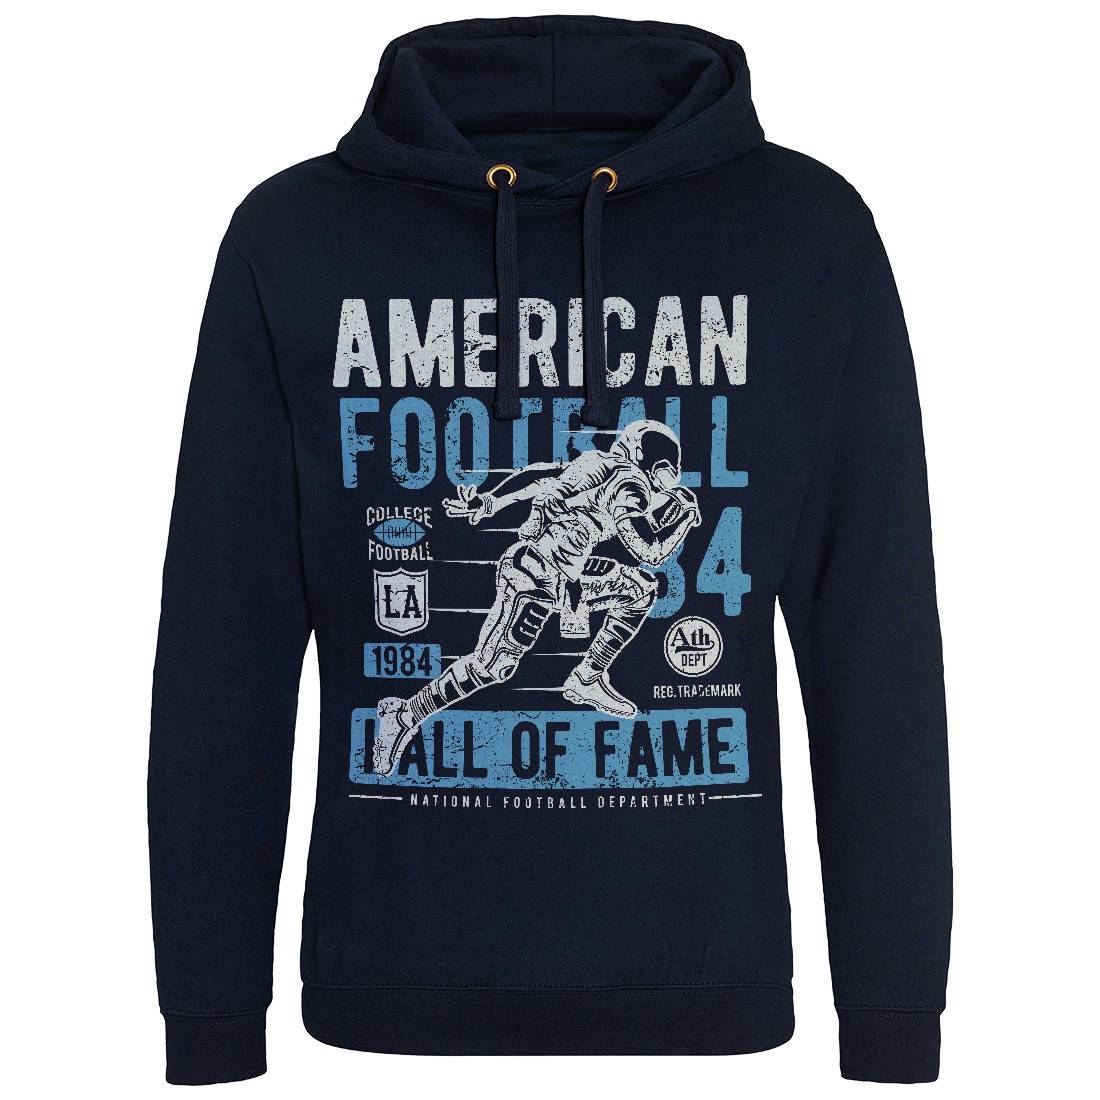 American Football Mens Hoodie Without Pocket Sport A006